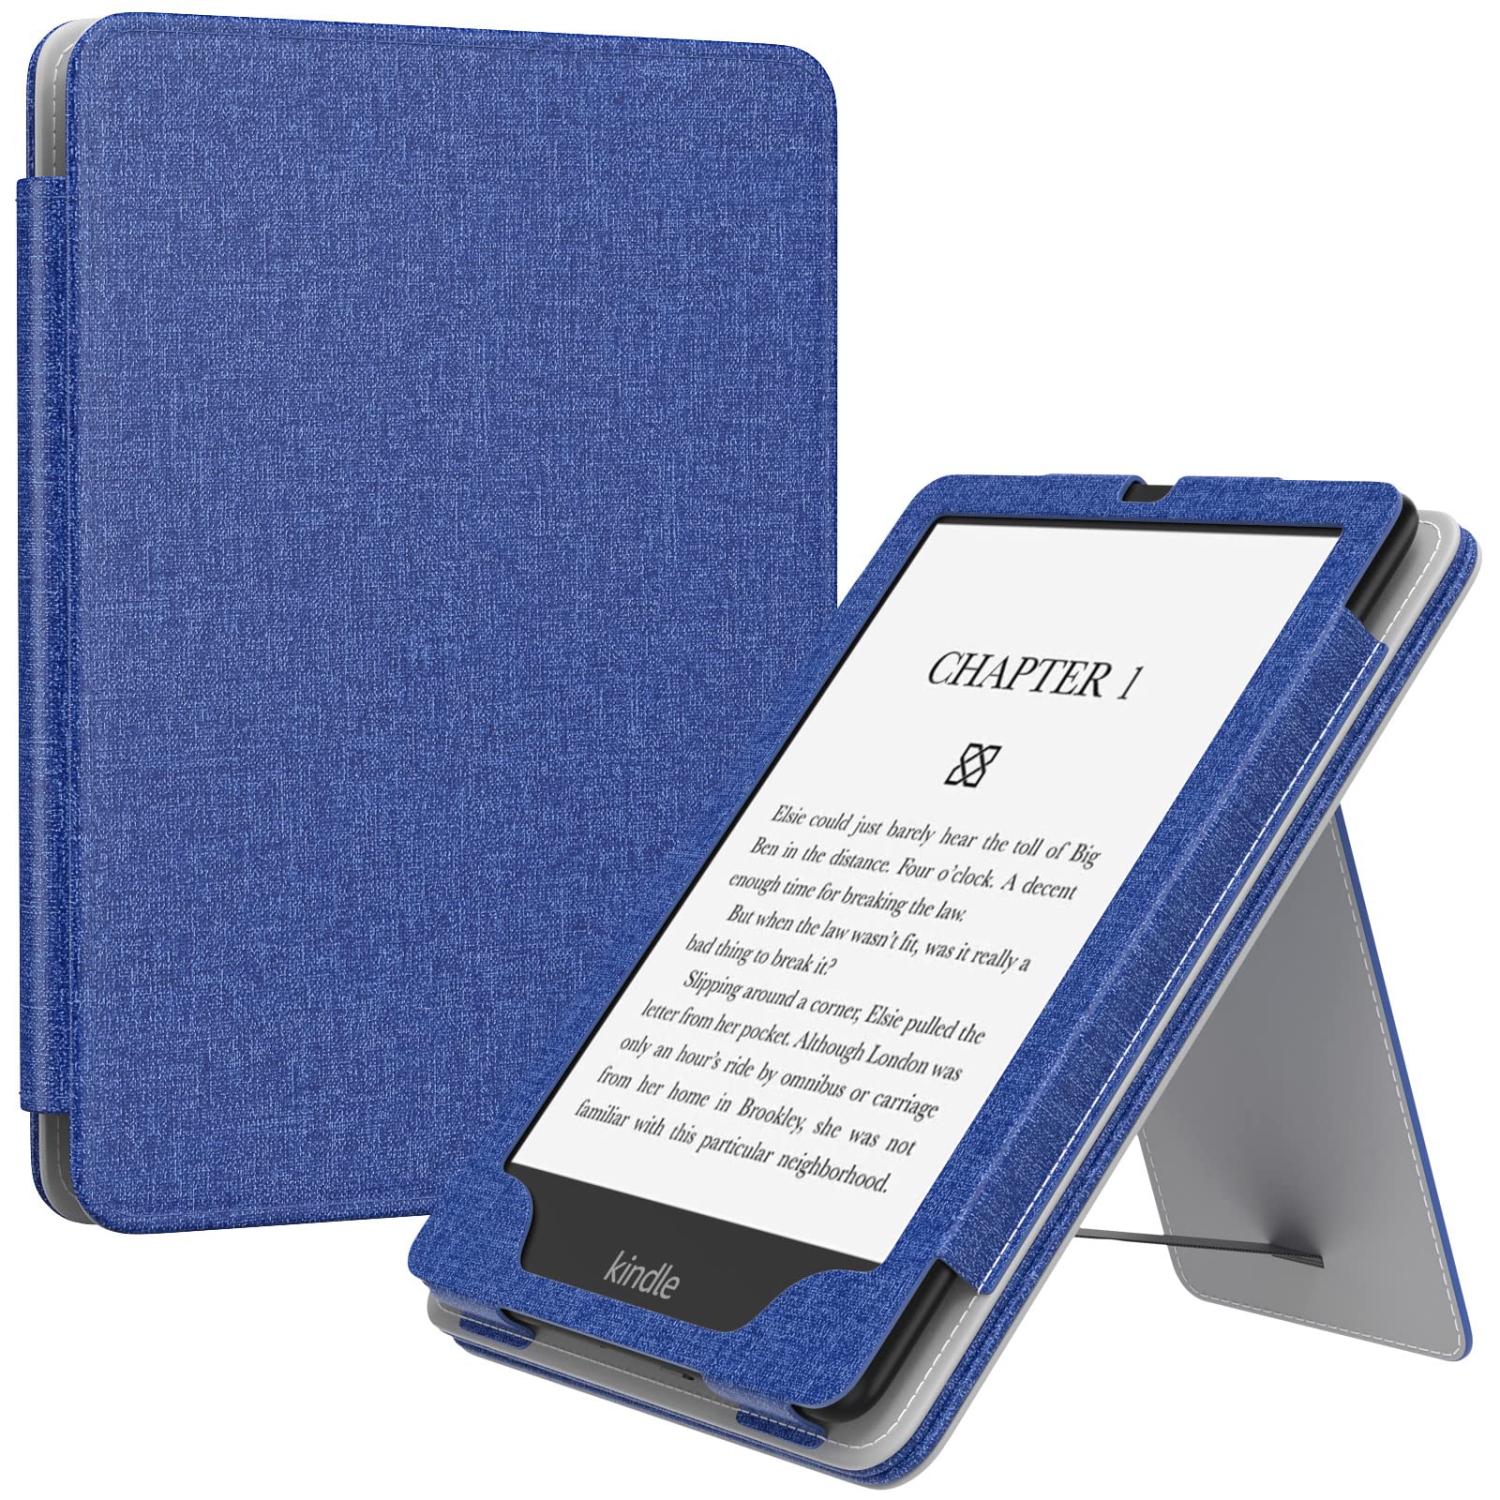 6.8" Kindle Paperwhite (11th Generation-2021) and Kindle Paperwhite Signature Edition, Slim PU Shell Cover Case with Auto-Wake/Sleep for Kindle Paperwhite 2021 E-Reader, Indigo